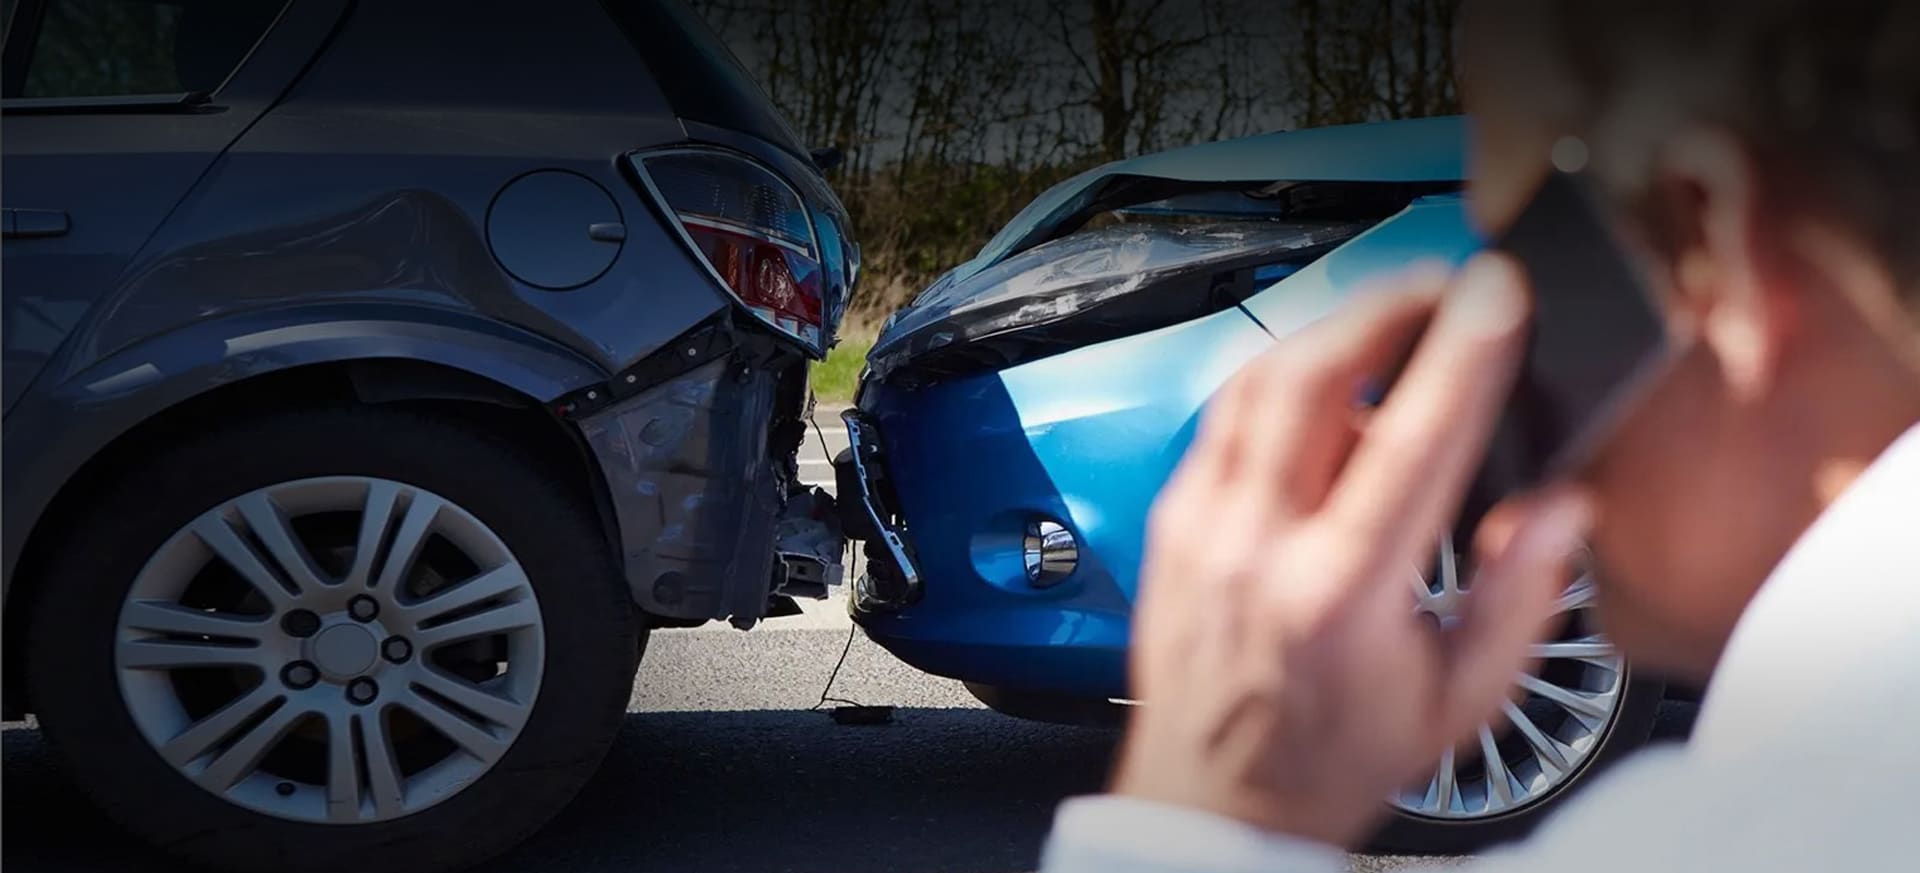 Has your vehicle bodywork been damaged?